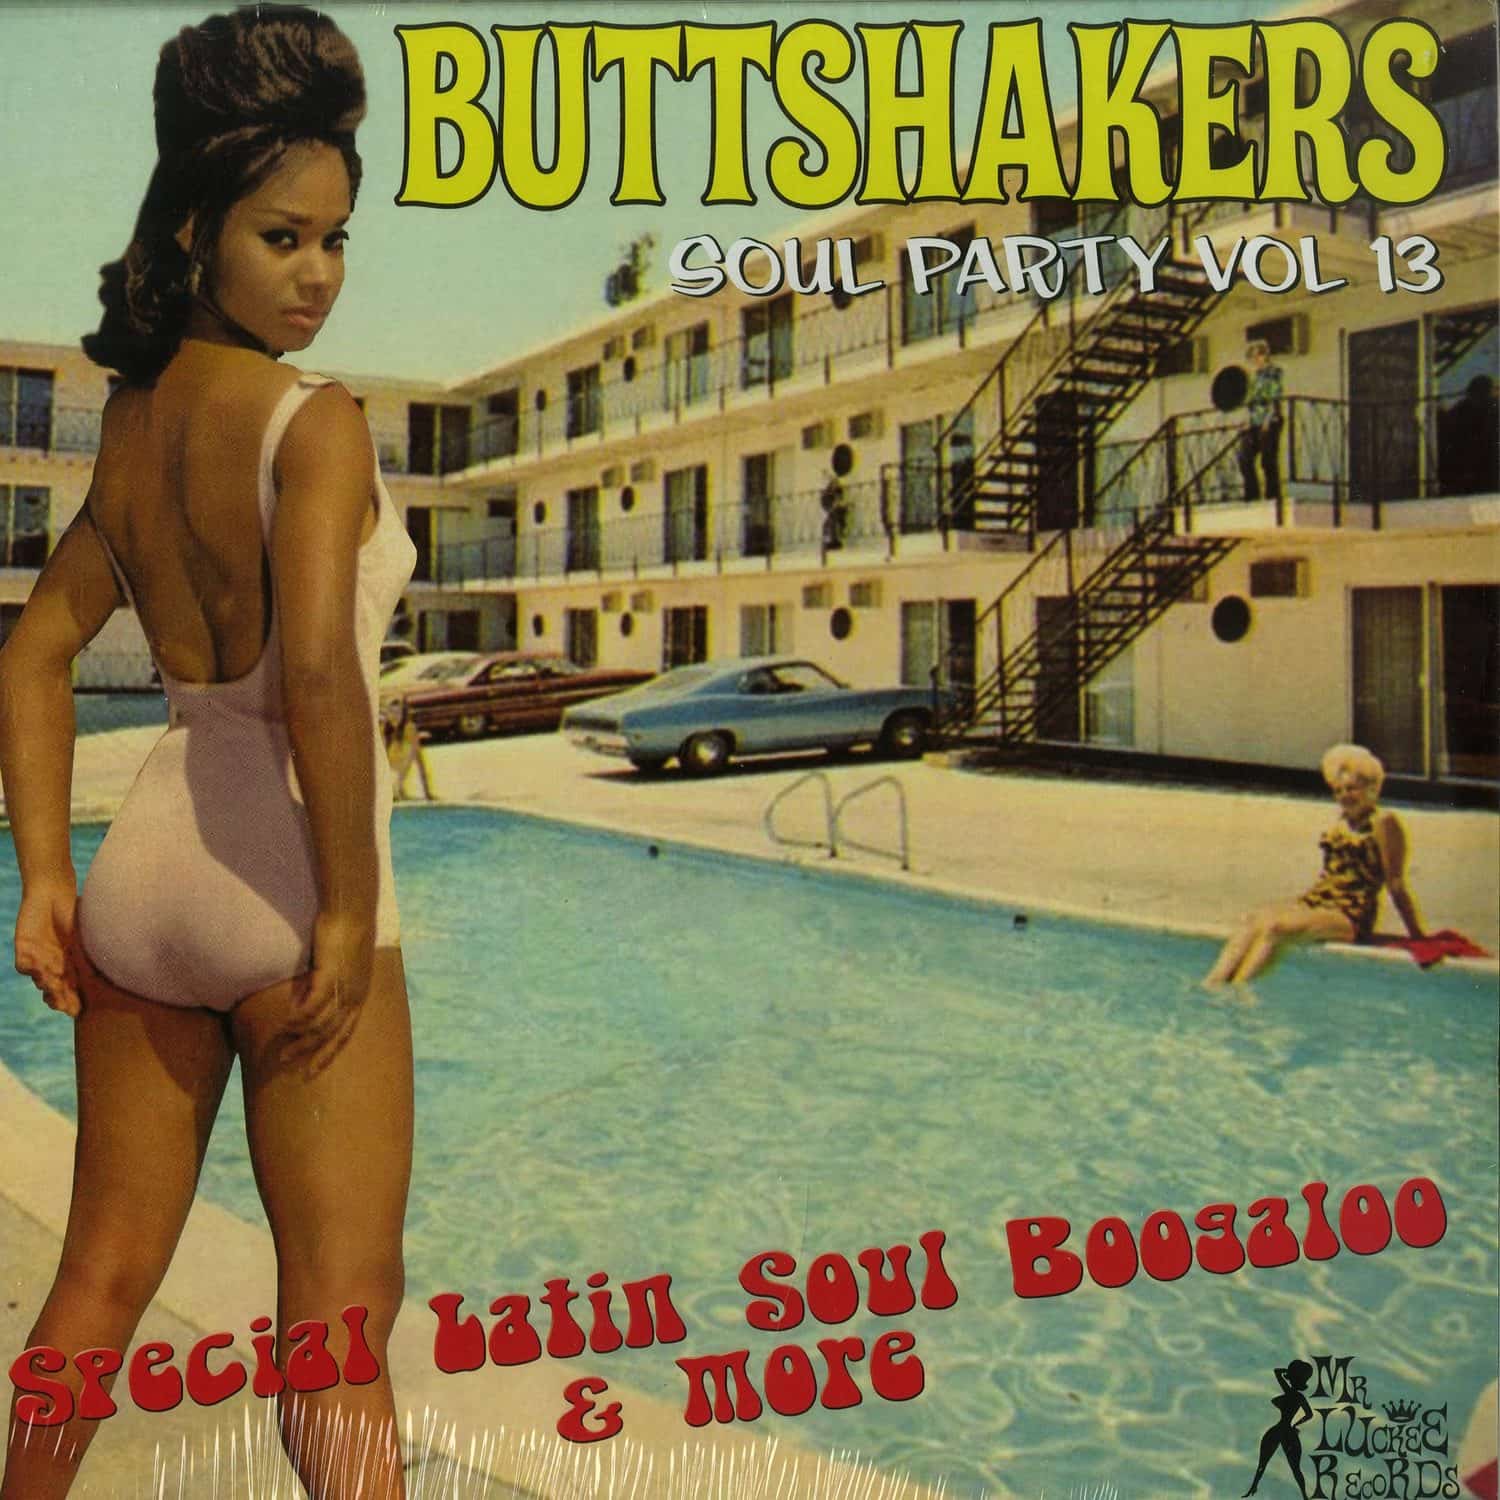 Buttshakers - BUTTSHAKERS SOUL PARTY VOL. 13 